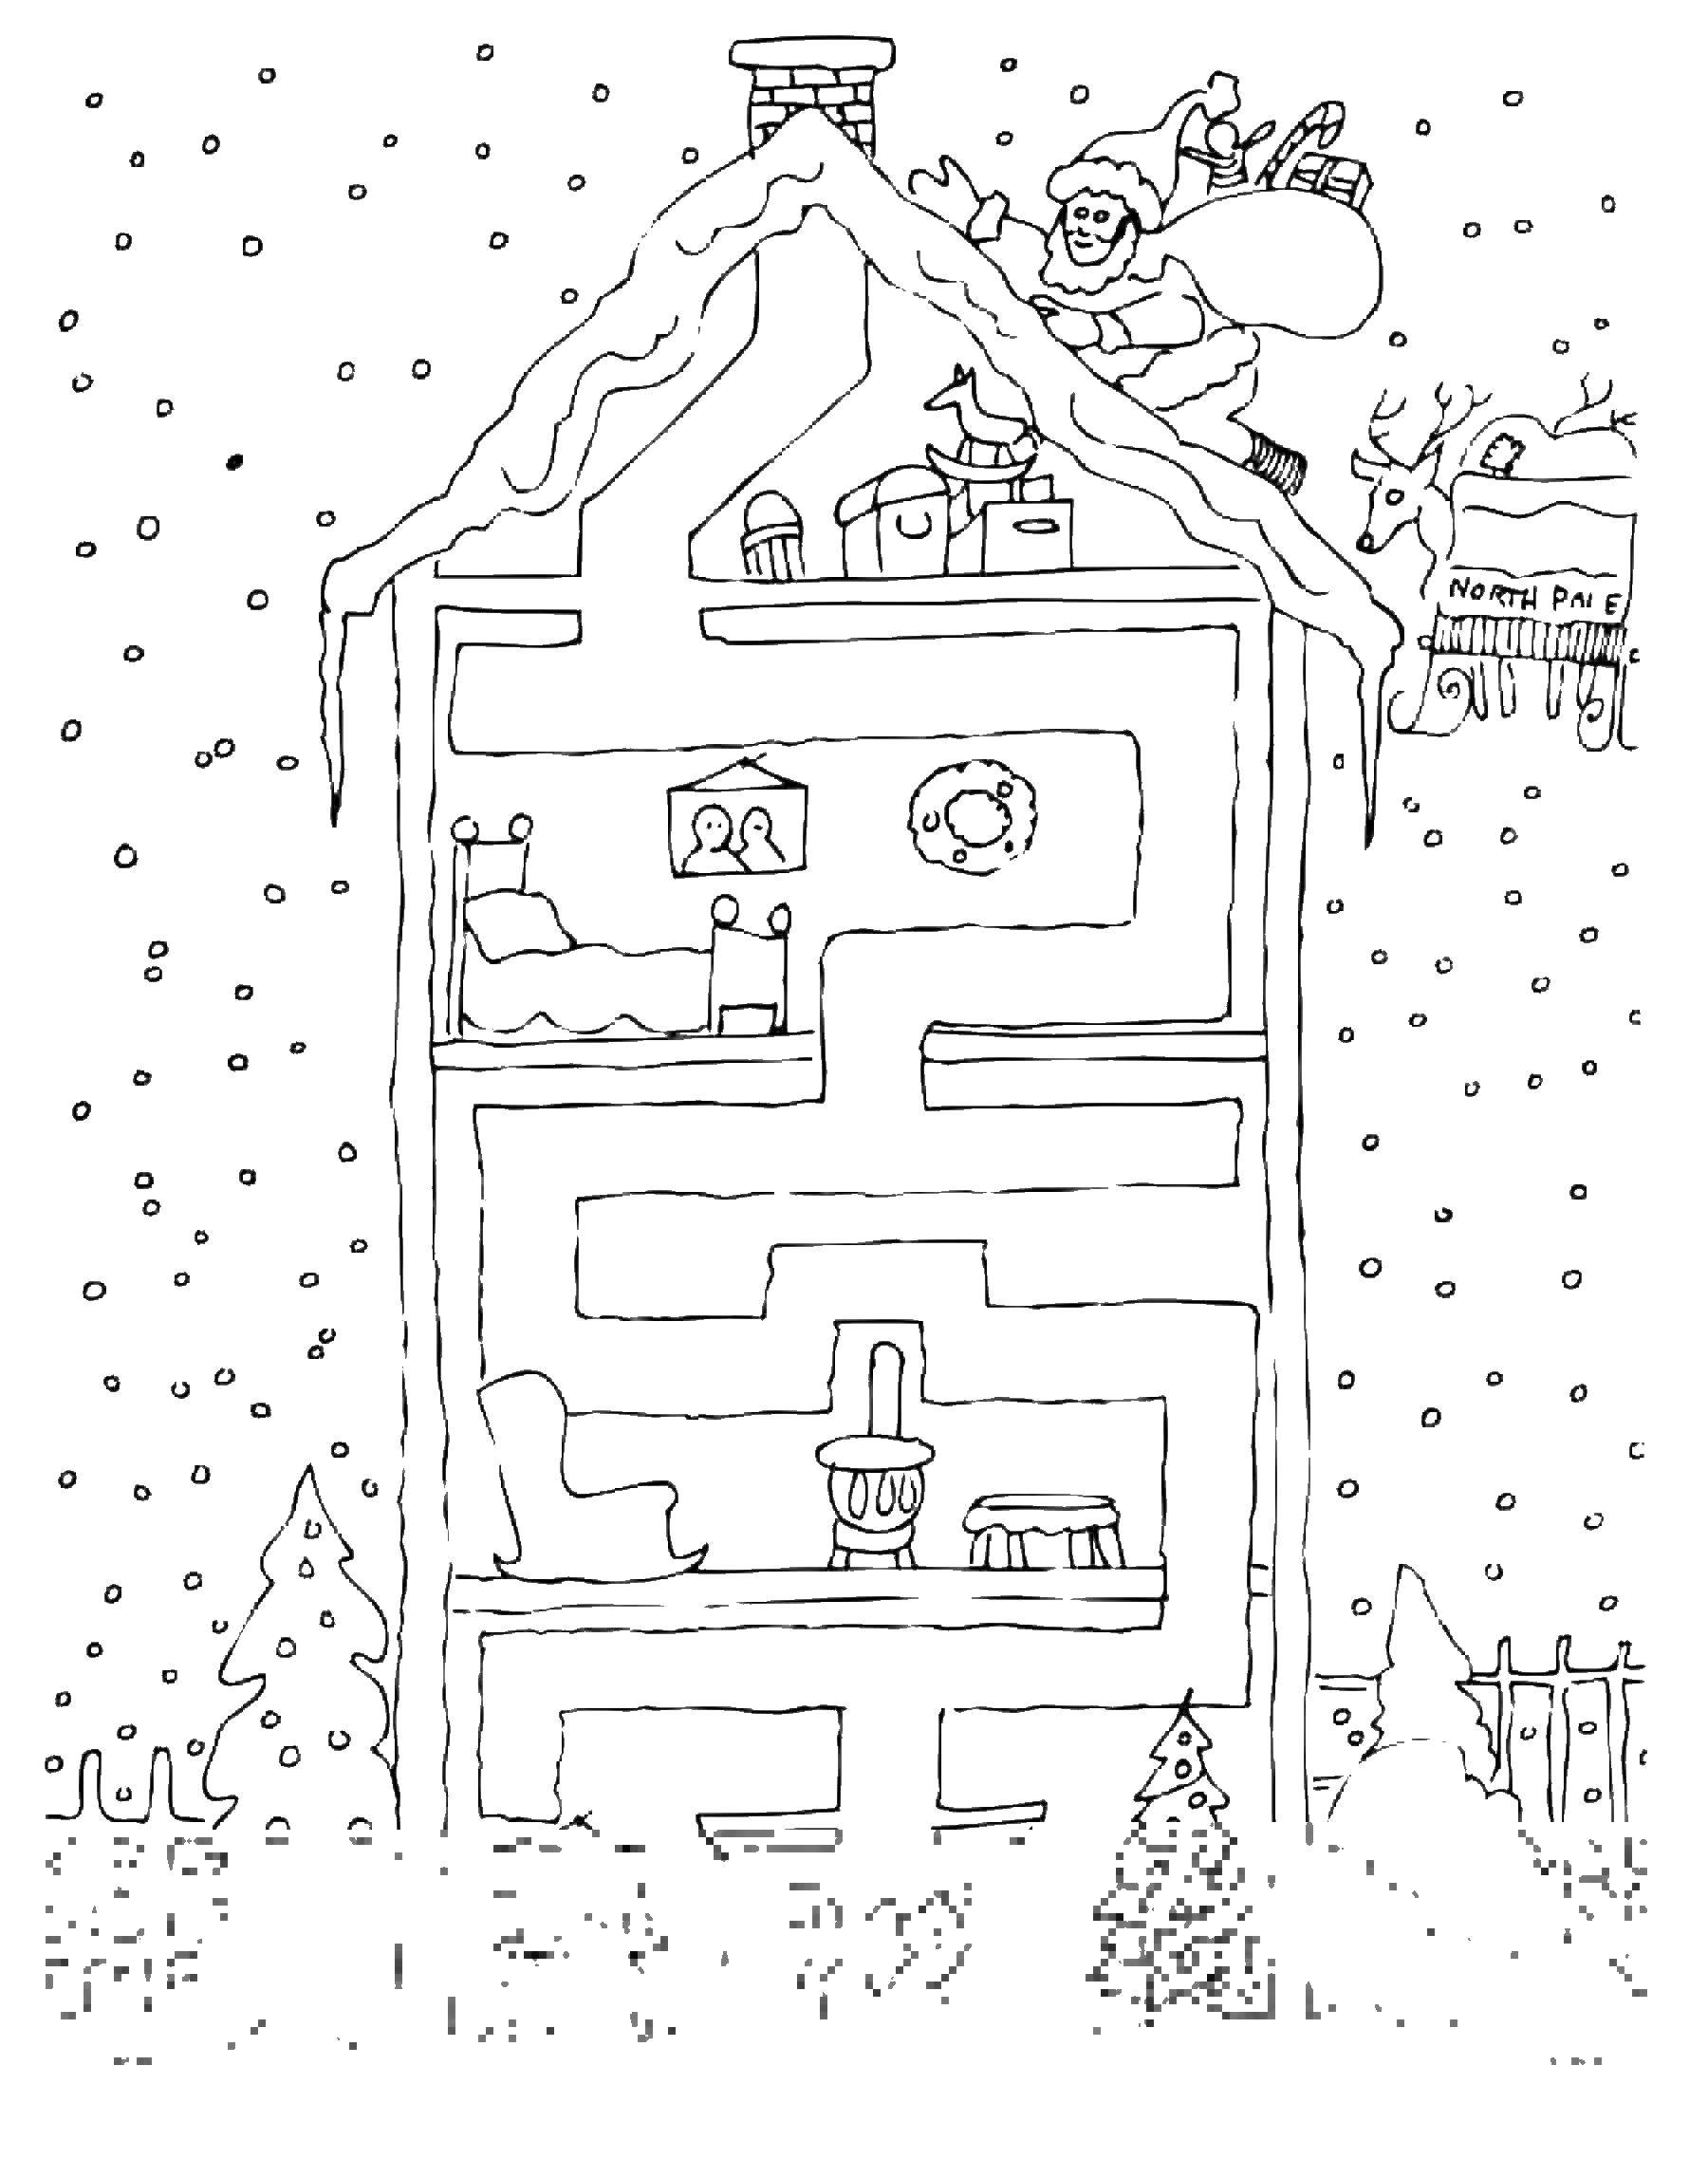 Coloring Santa Claus is looking for a Christmas tree. Category Mazes. Tags:  maze, Santa.